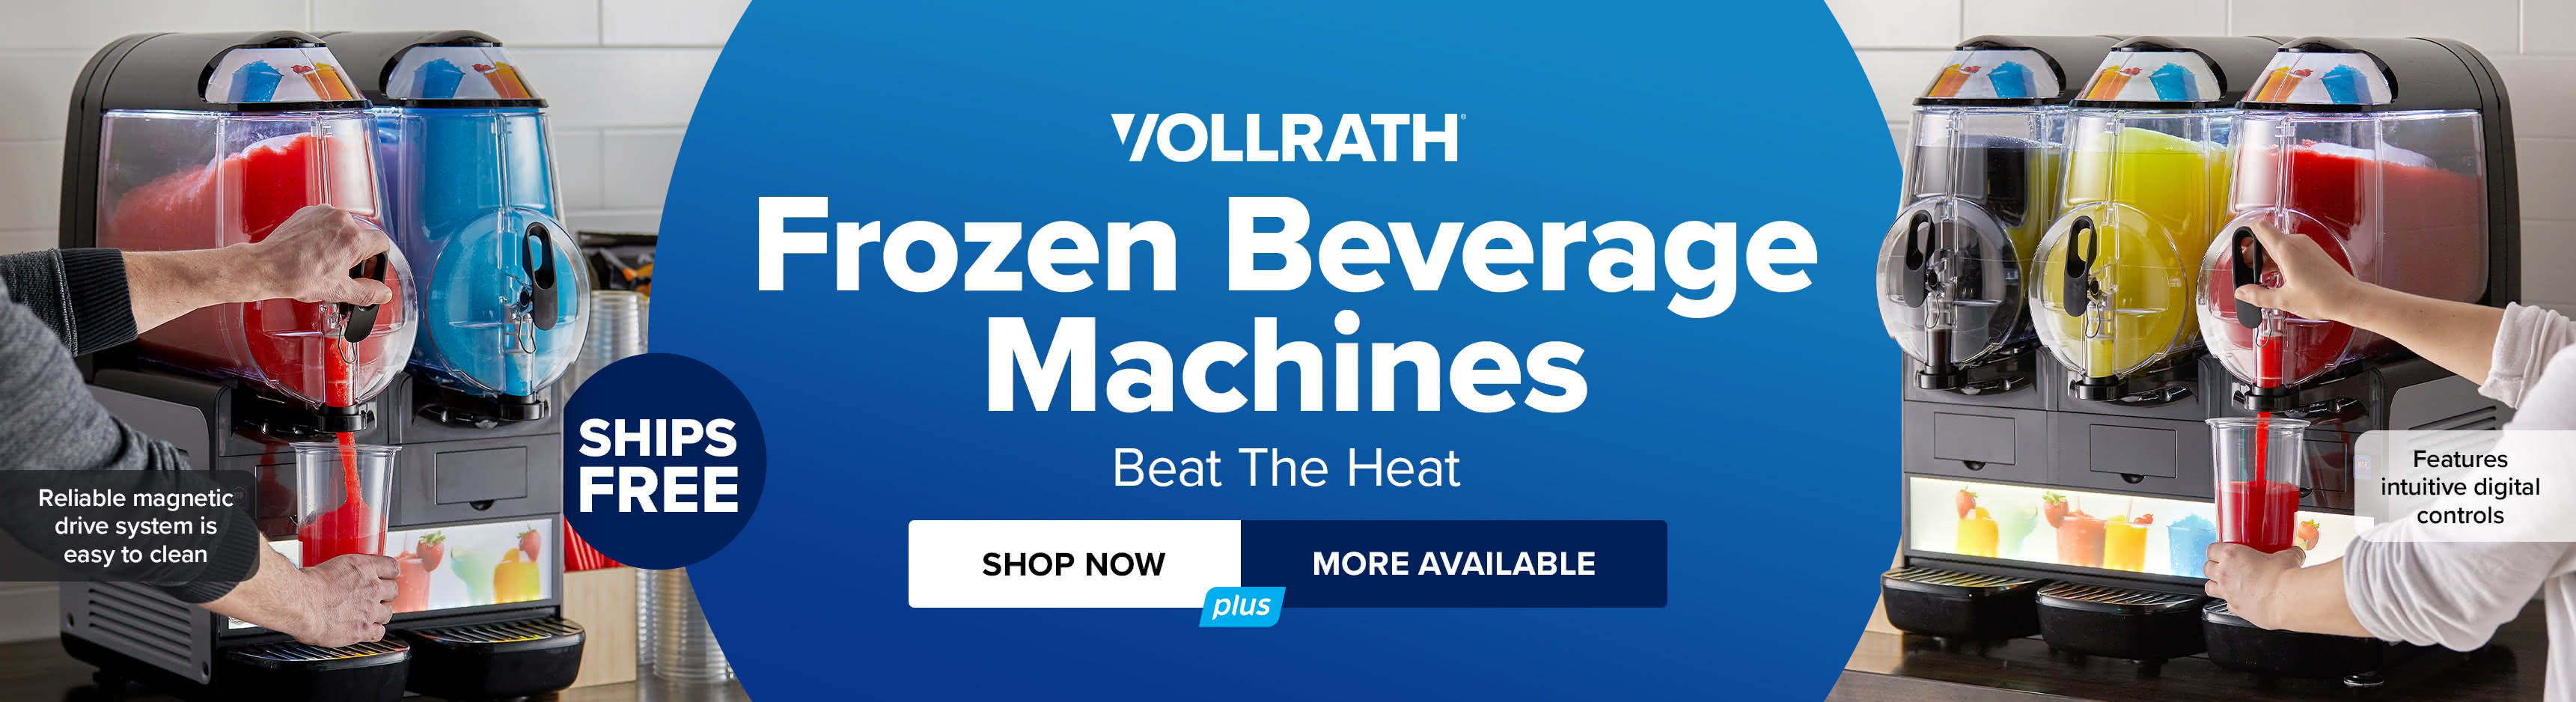 Vollrath Frozen Beverage Machines. Beat The Heat. Shop Now. More Available.